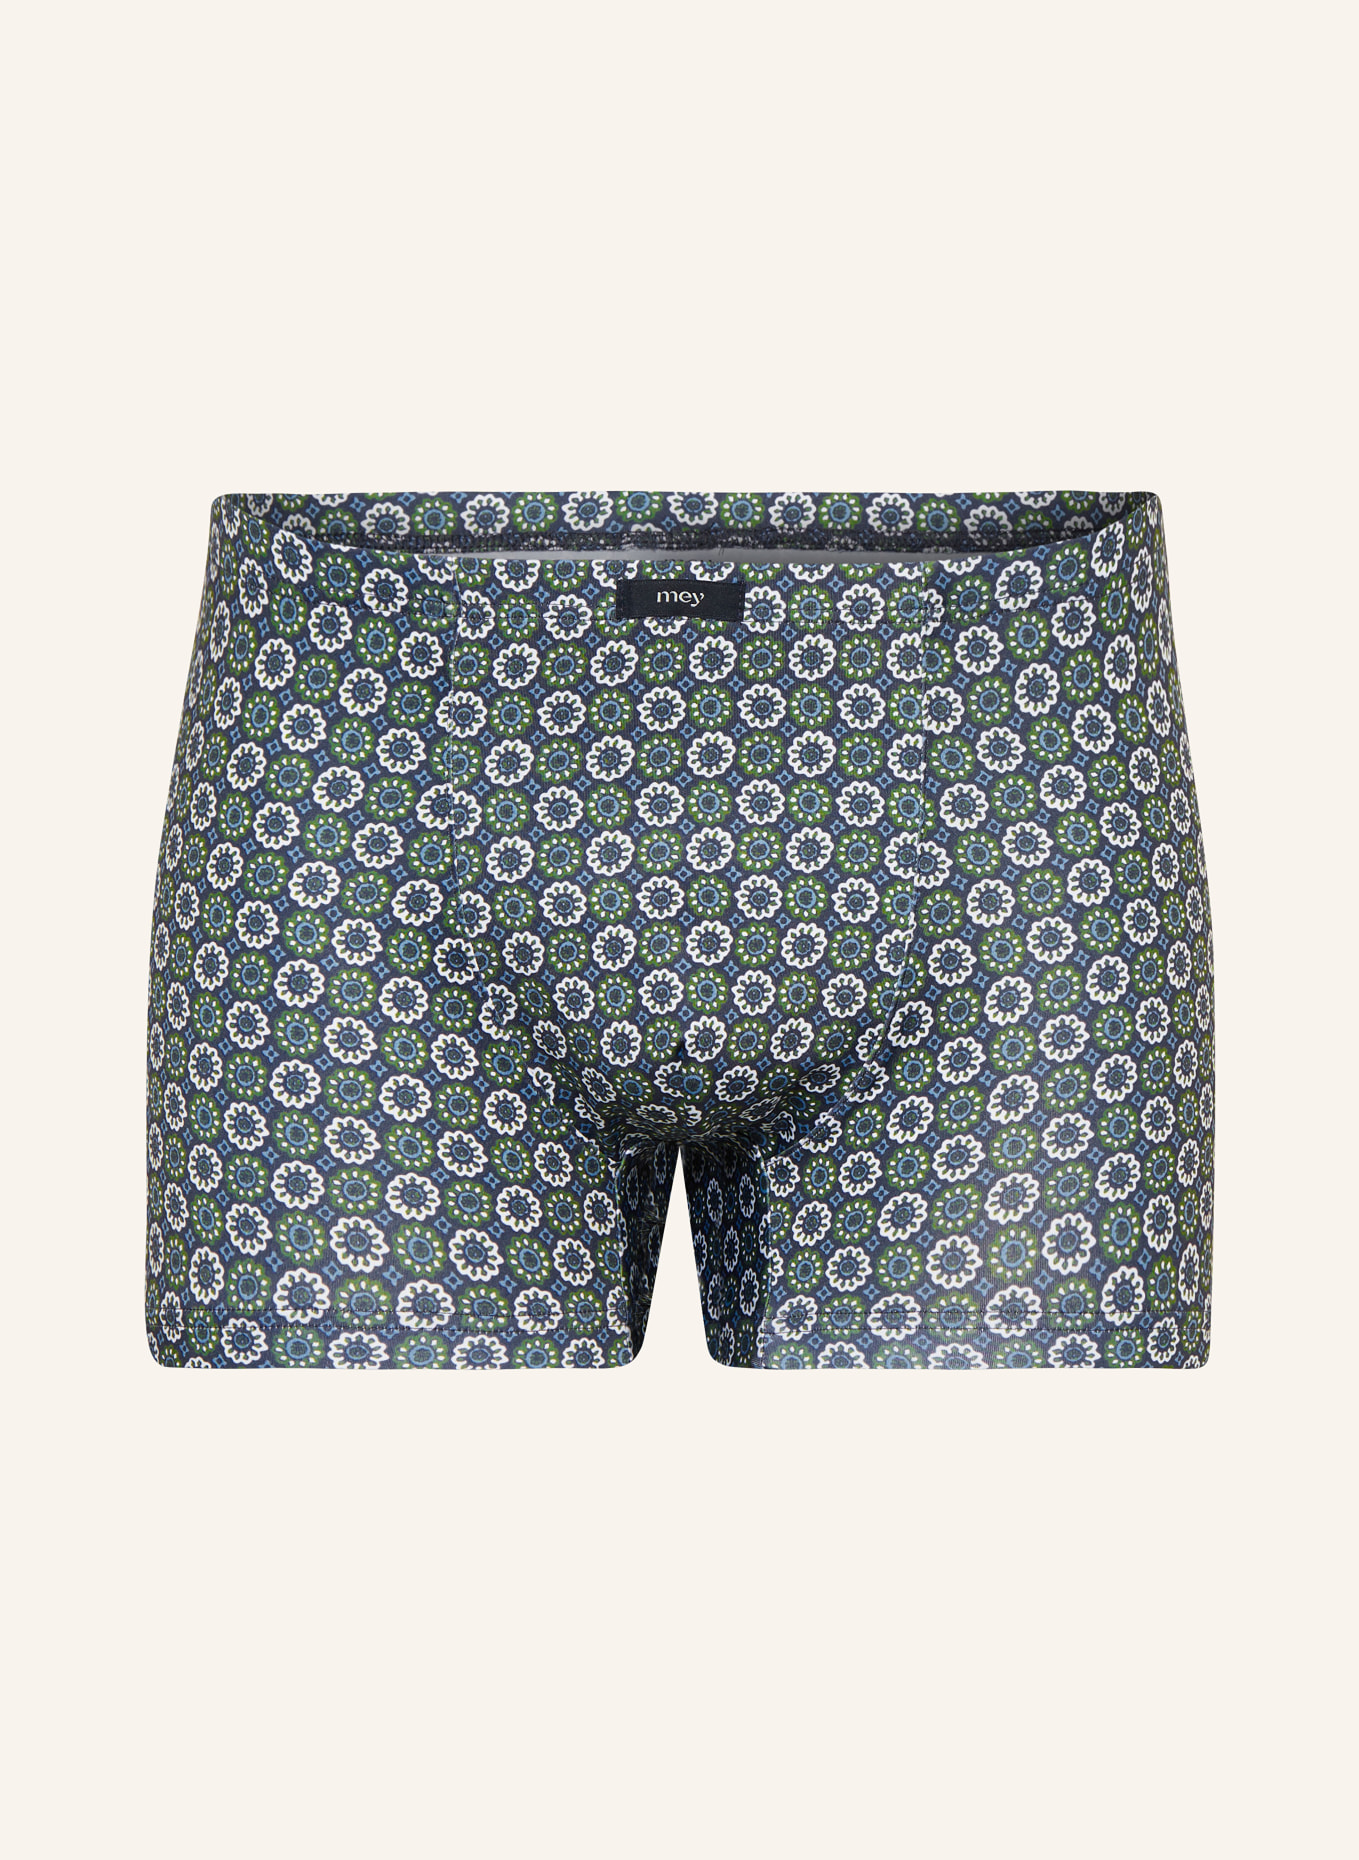 mey Boxer shorts series FLOWERY, Color: DARK BLUE/ OLIVE/ WHITE (Image 1)